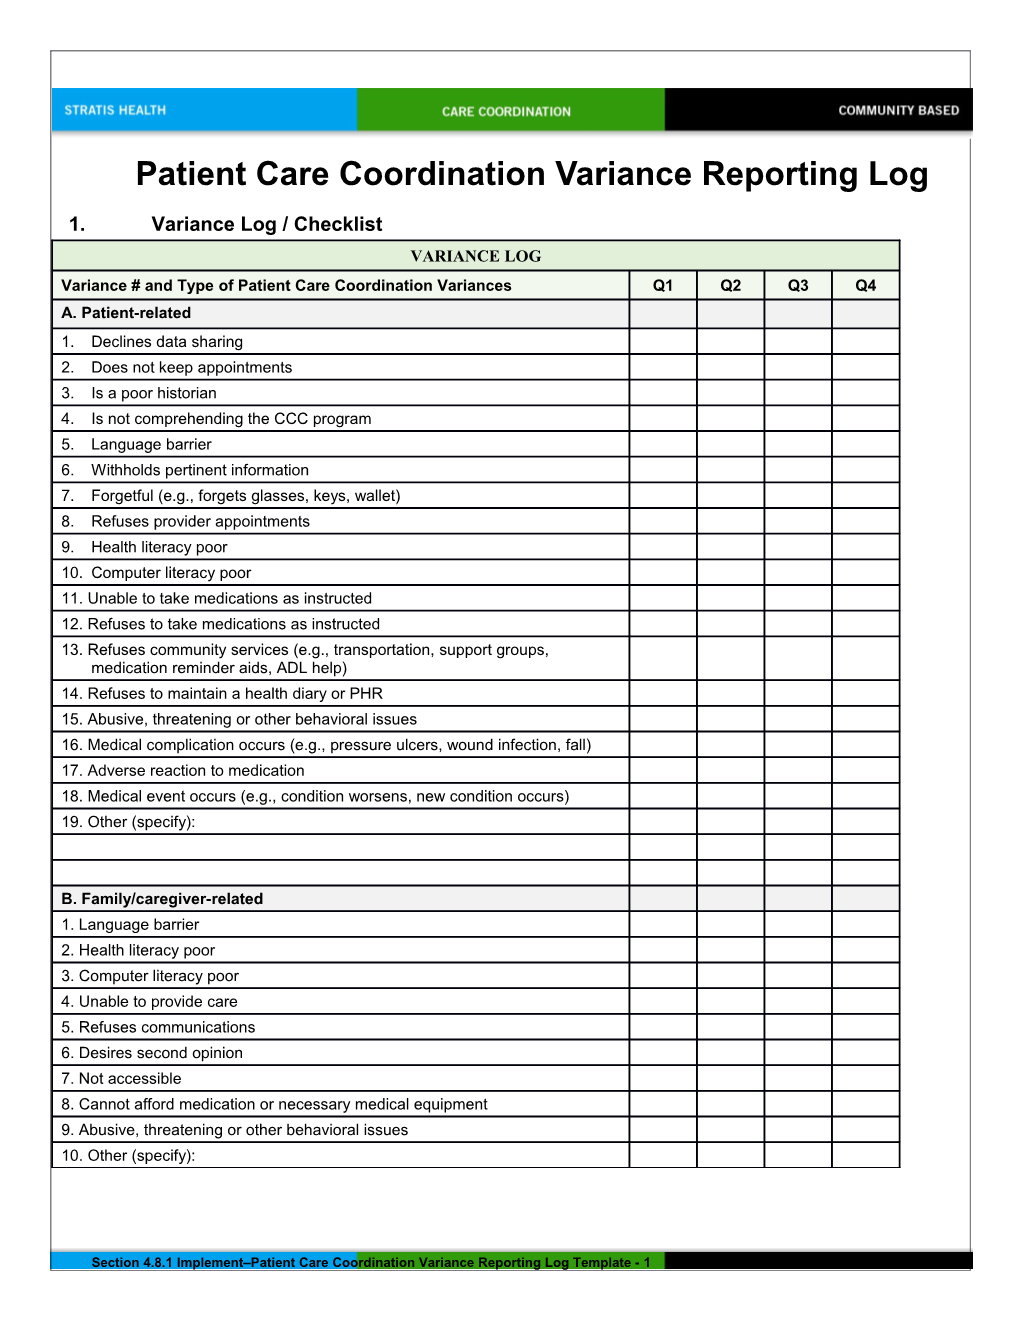 Patient Care Coordination Variance Reporting Log Template